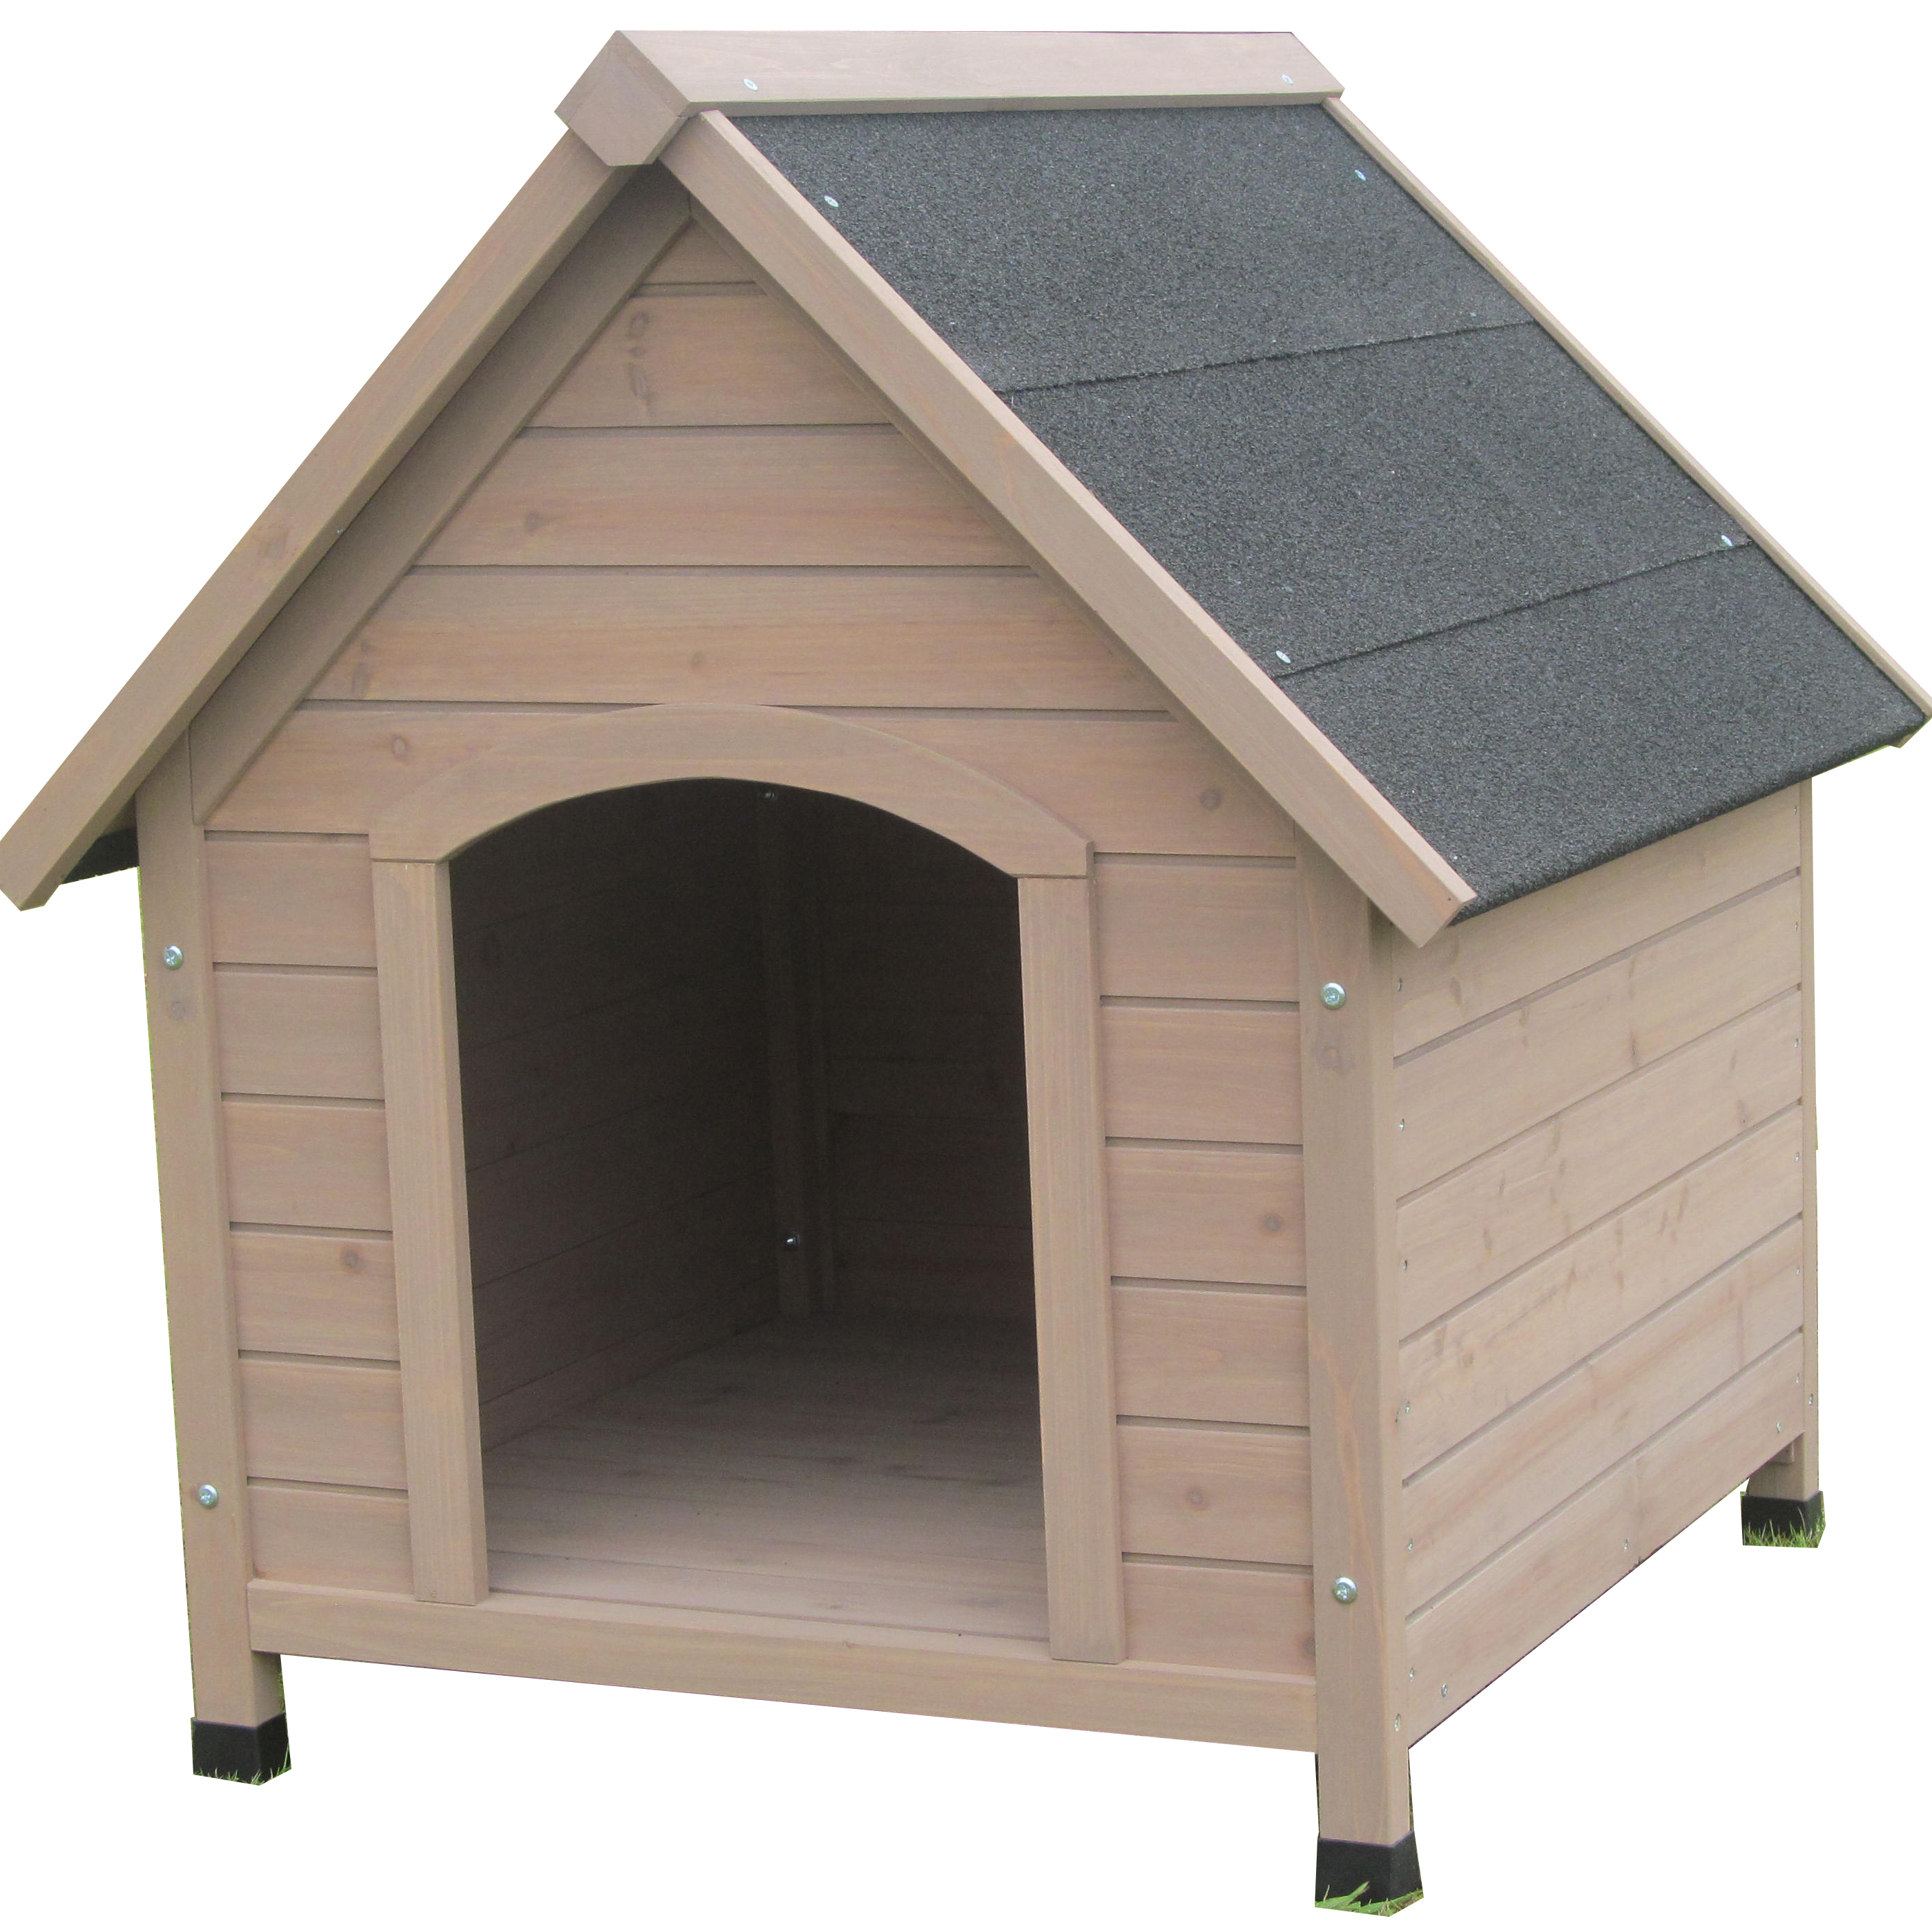 China factory supplier outdoor Small Medium Large Animals popular wooden puppy house for sale